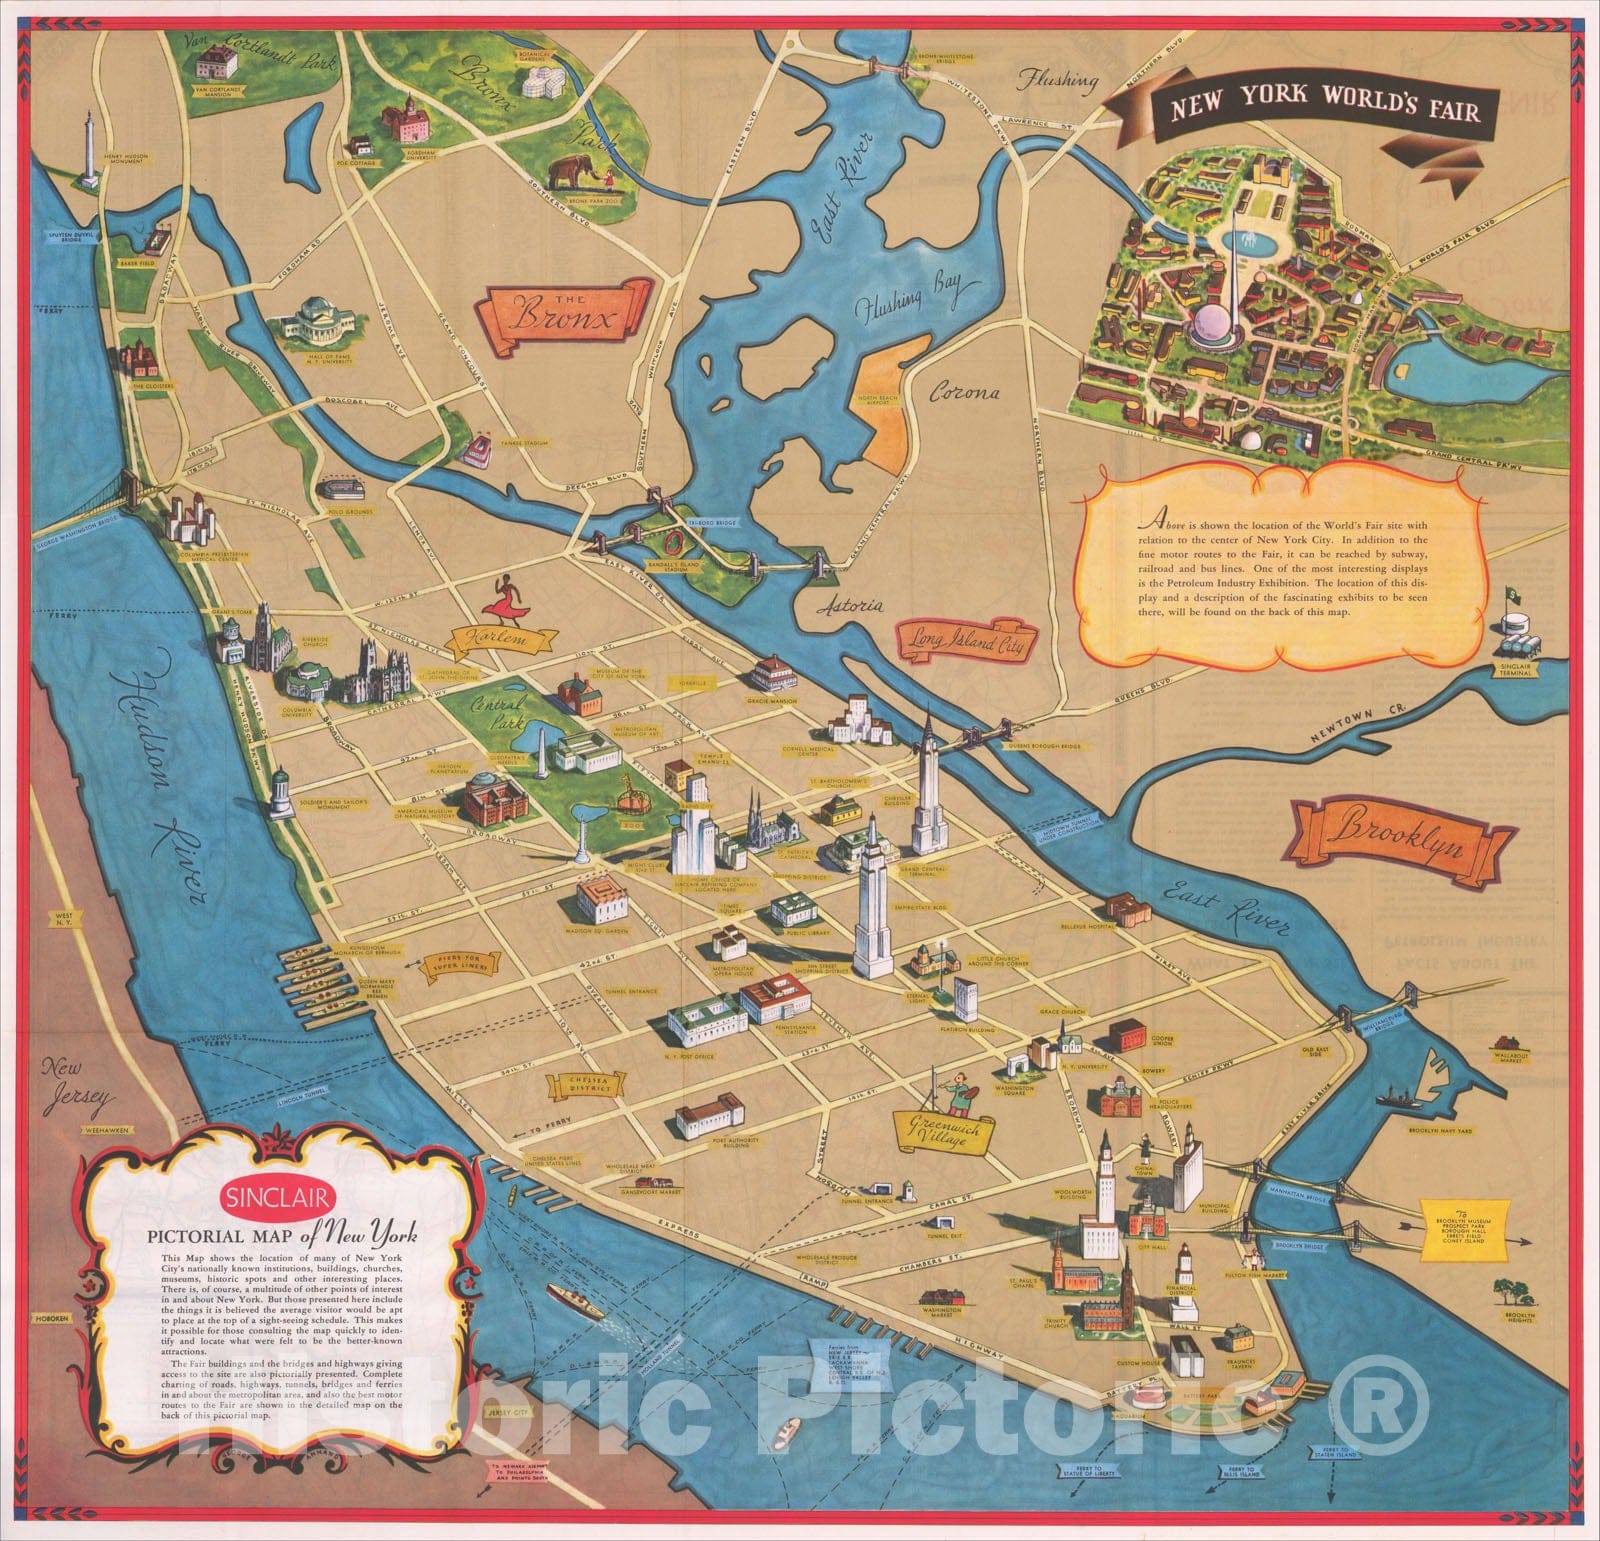 Historic Map : Pictorial Map of New York - New York World's Fair, 1939, George Annand, Vintage Wall Art